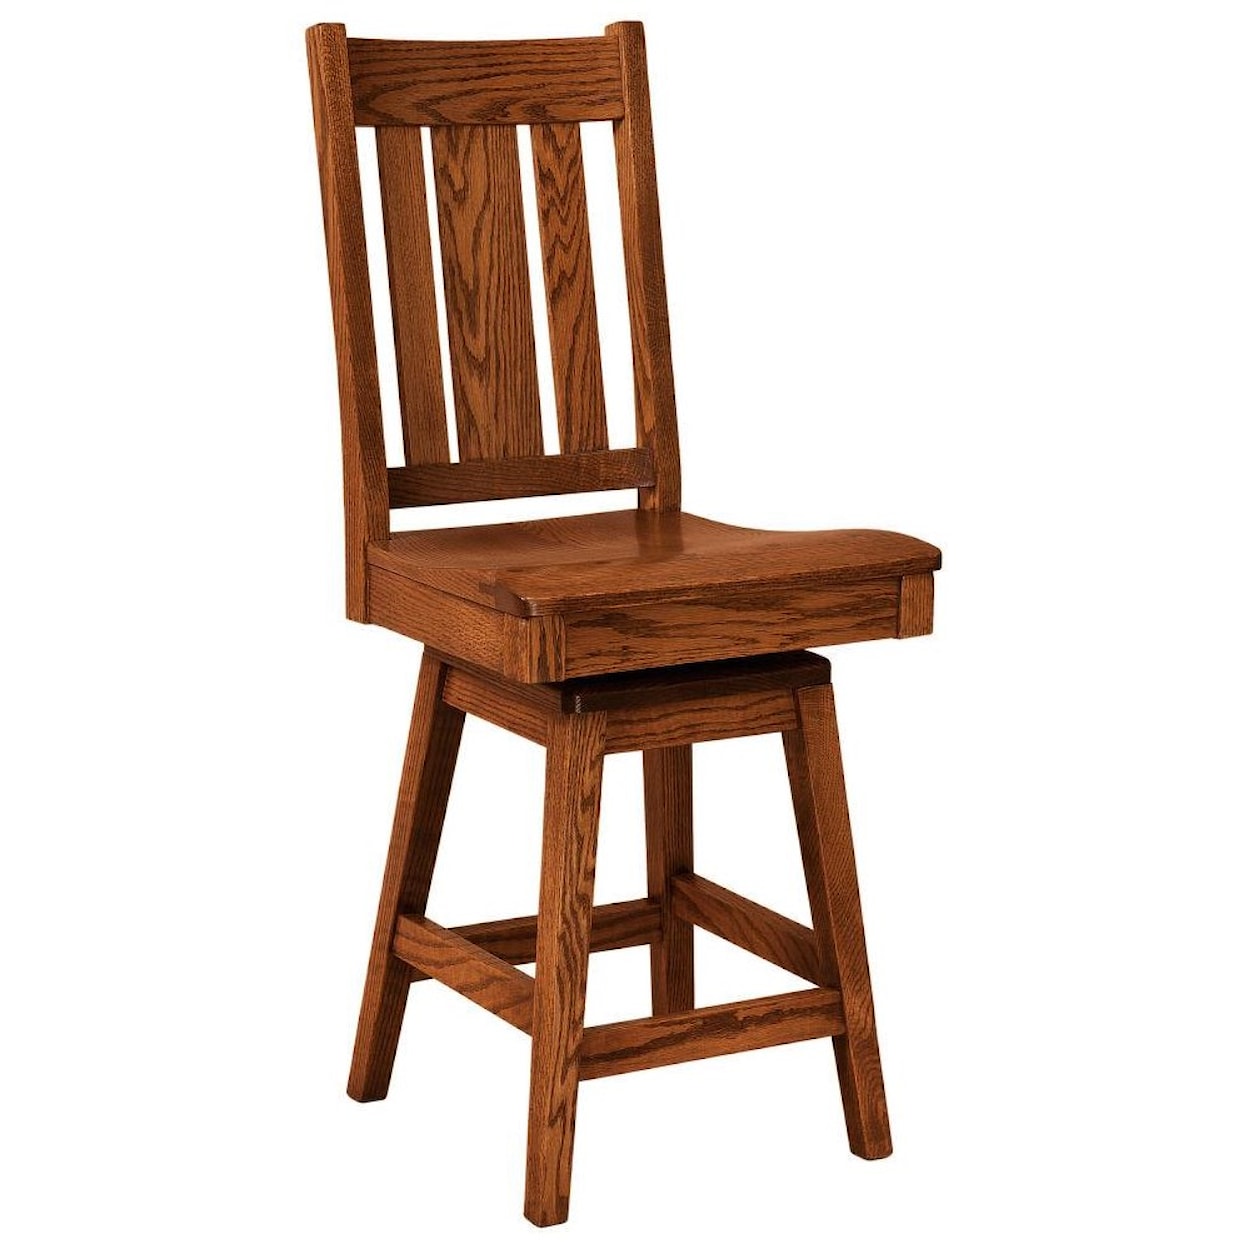 F&N Woodworking Jacoby 24" Swivel Stool